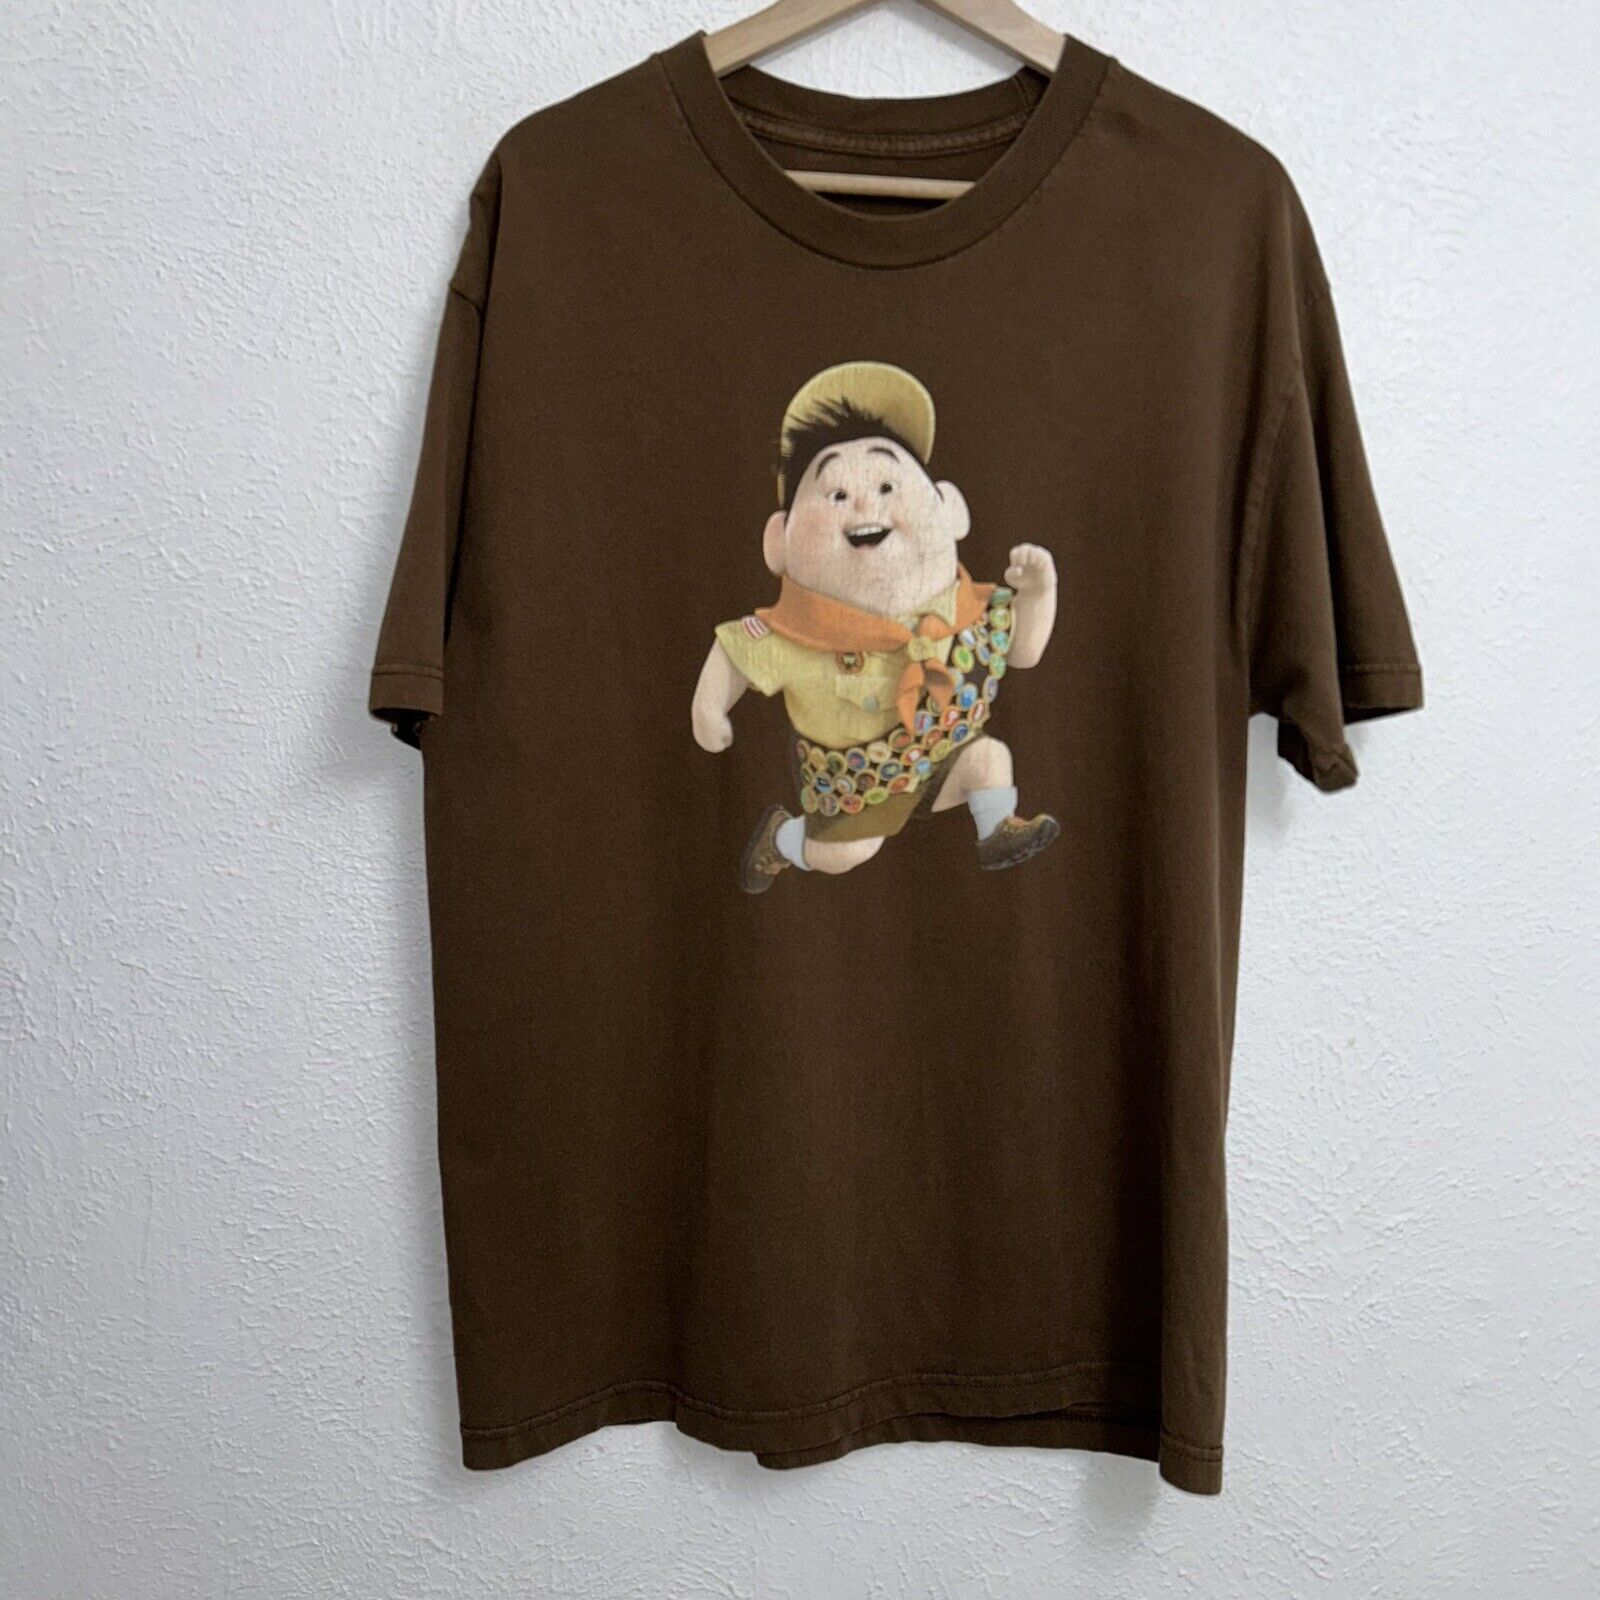 Disney Pixar's UP Cast And Crew Russell  Tee Brown T-Shirt Short Sleeve Large